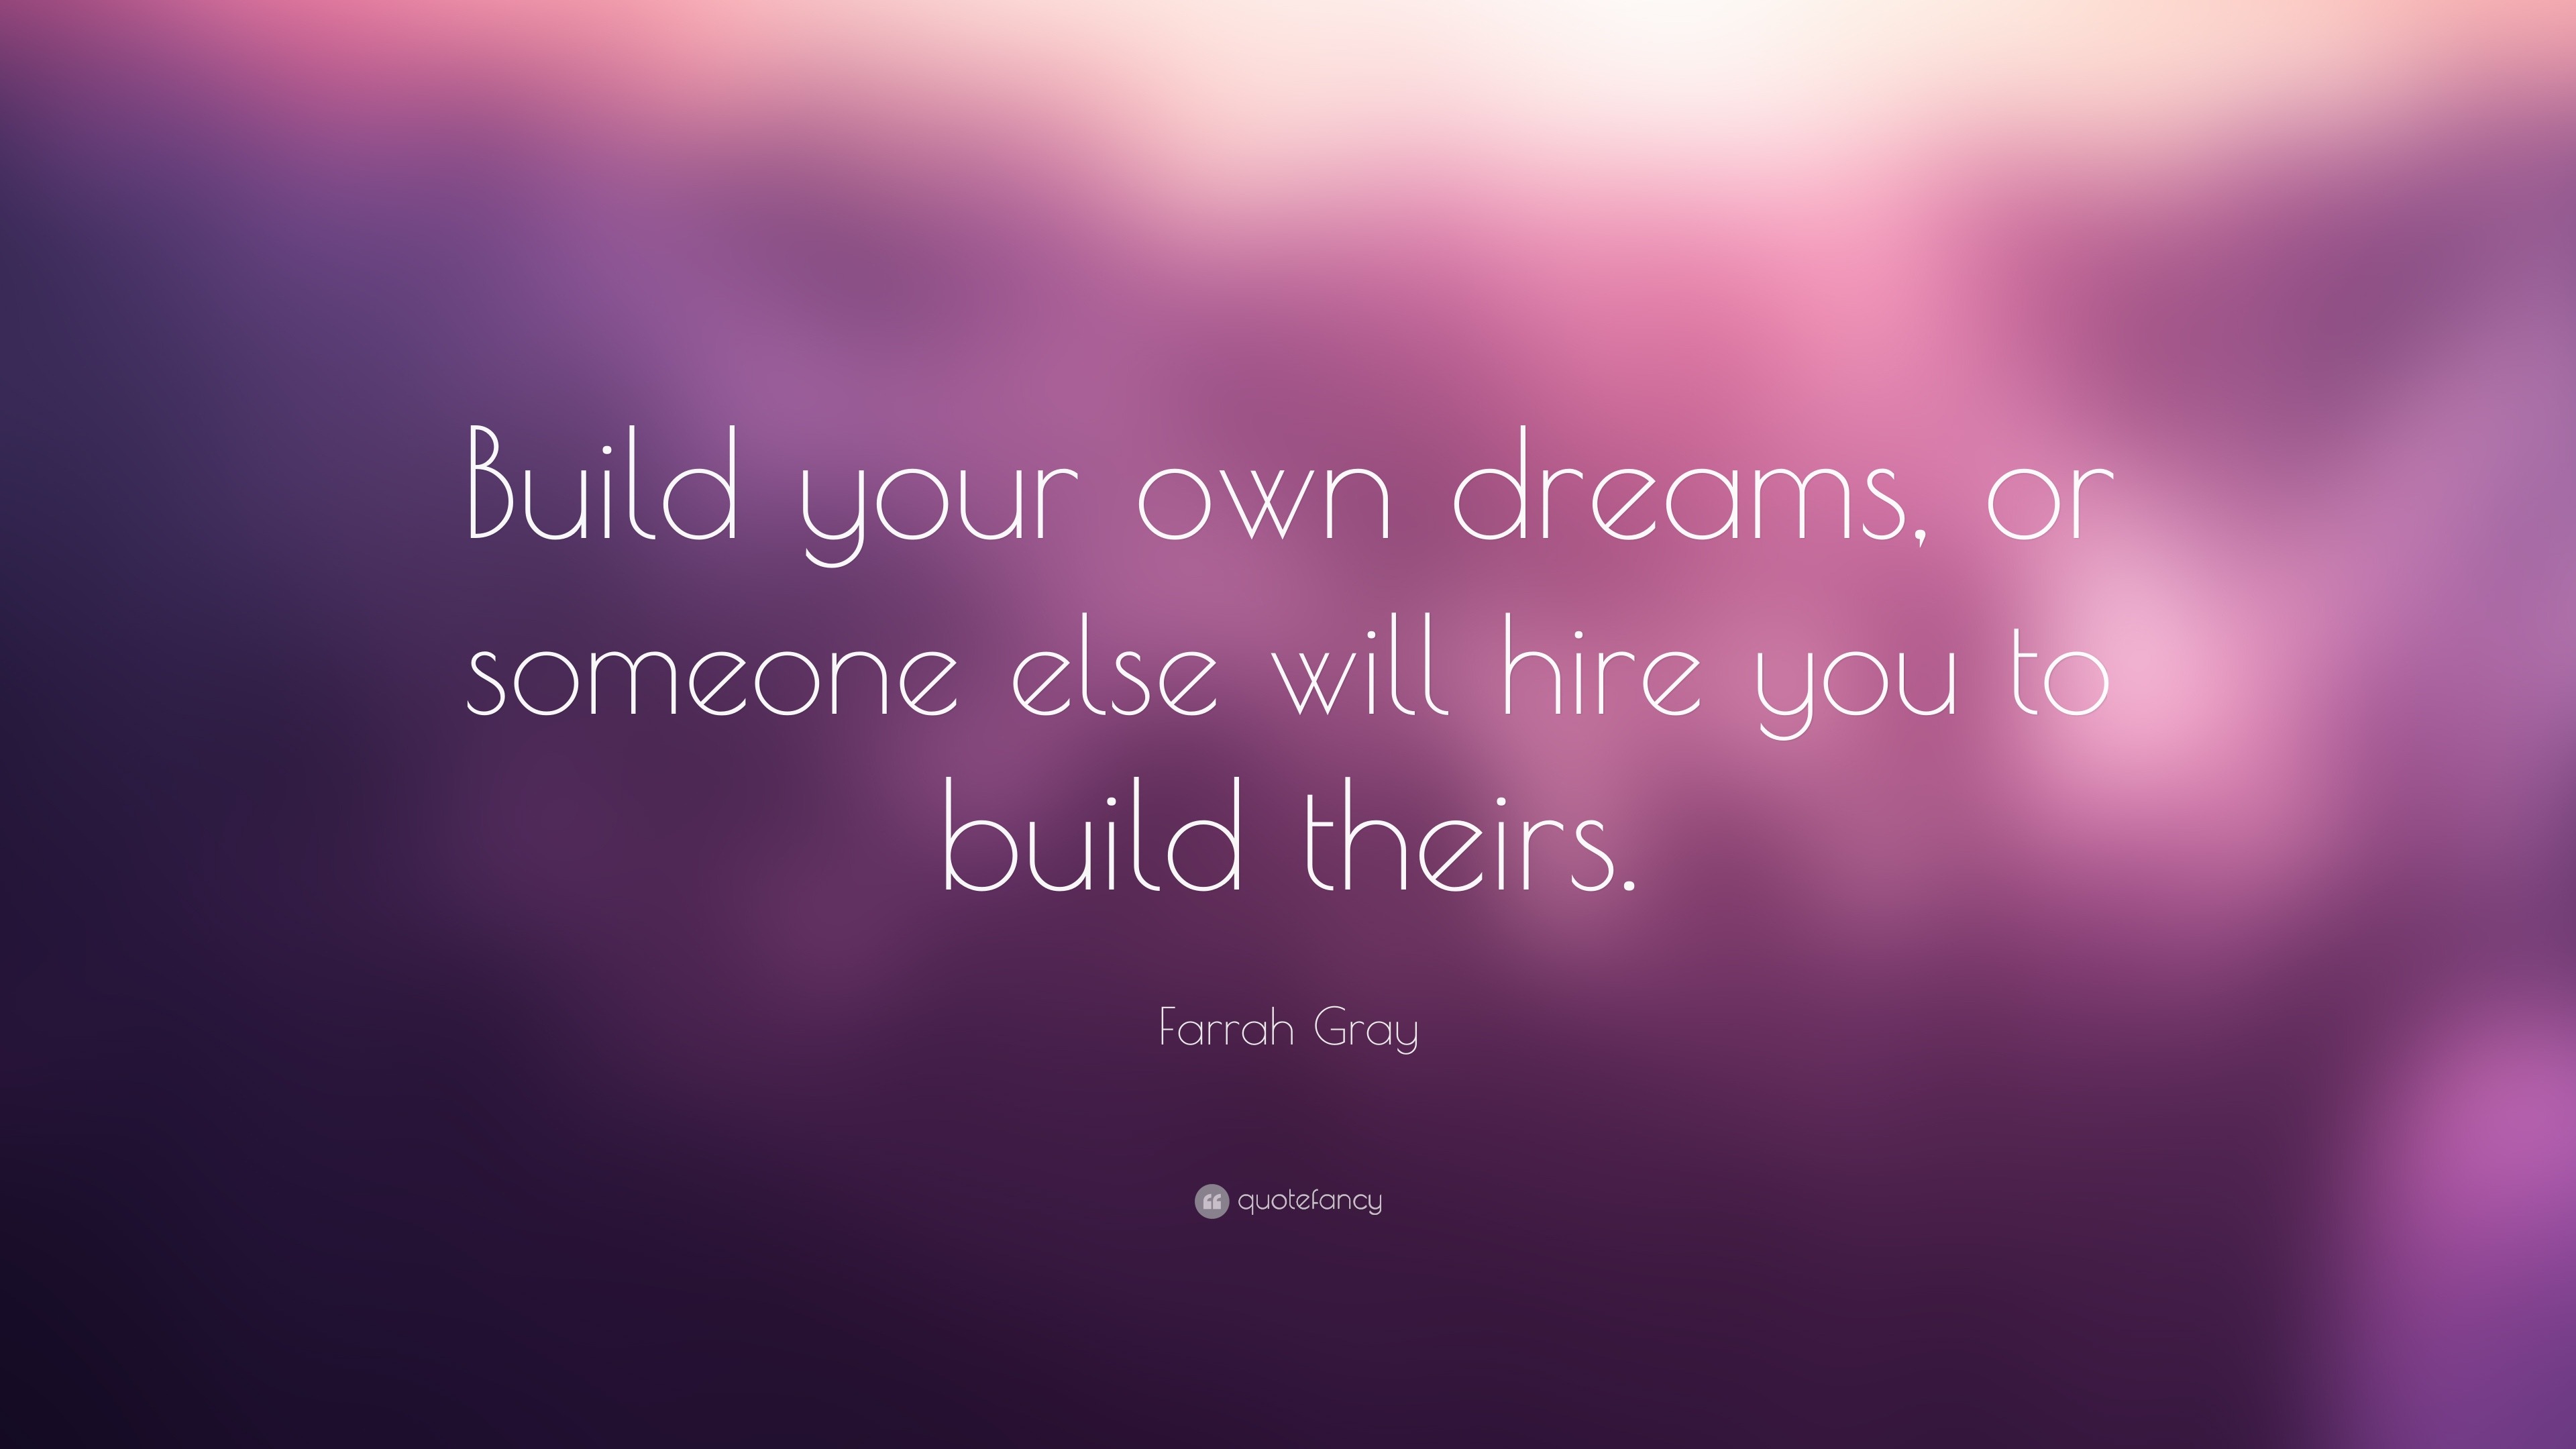 Farrah Gray Quote: “Build your own dreams, or someone else will hire